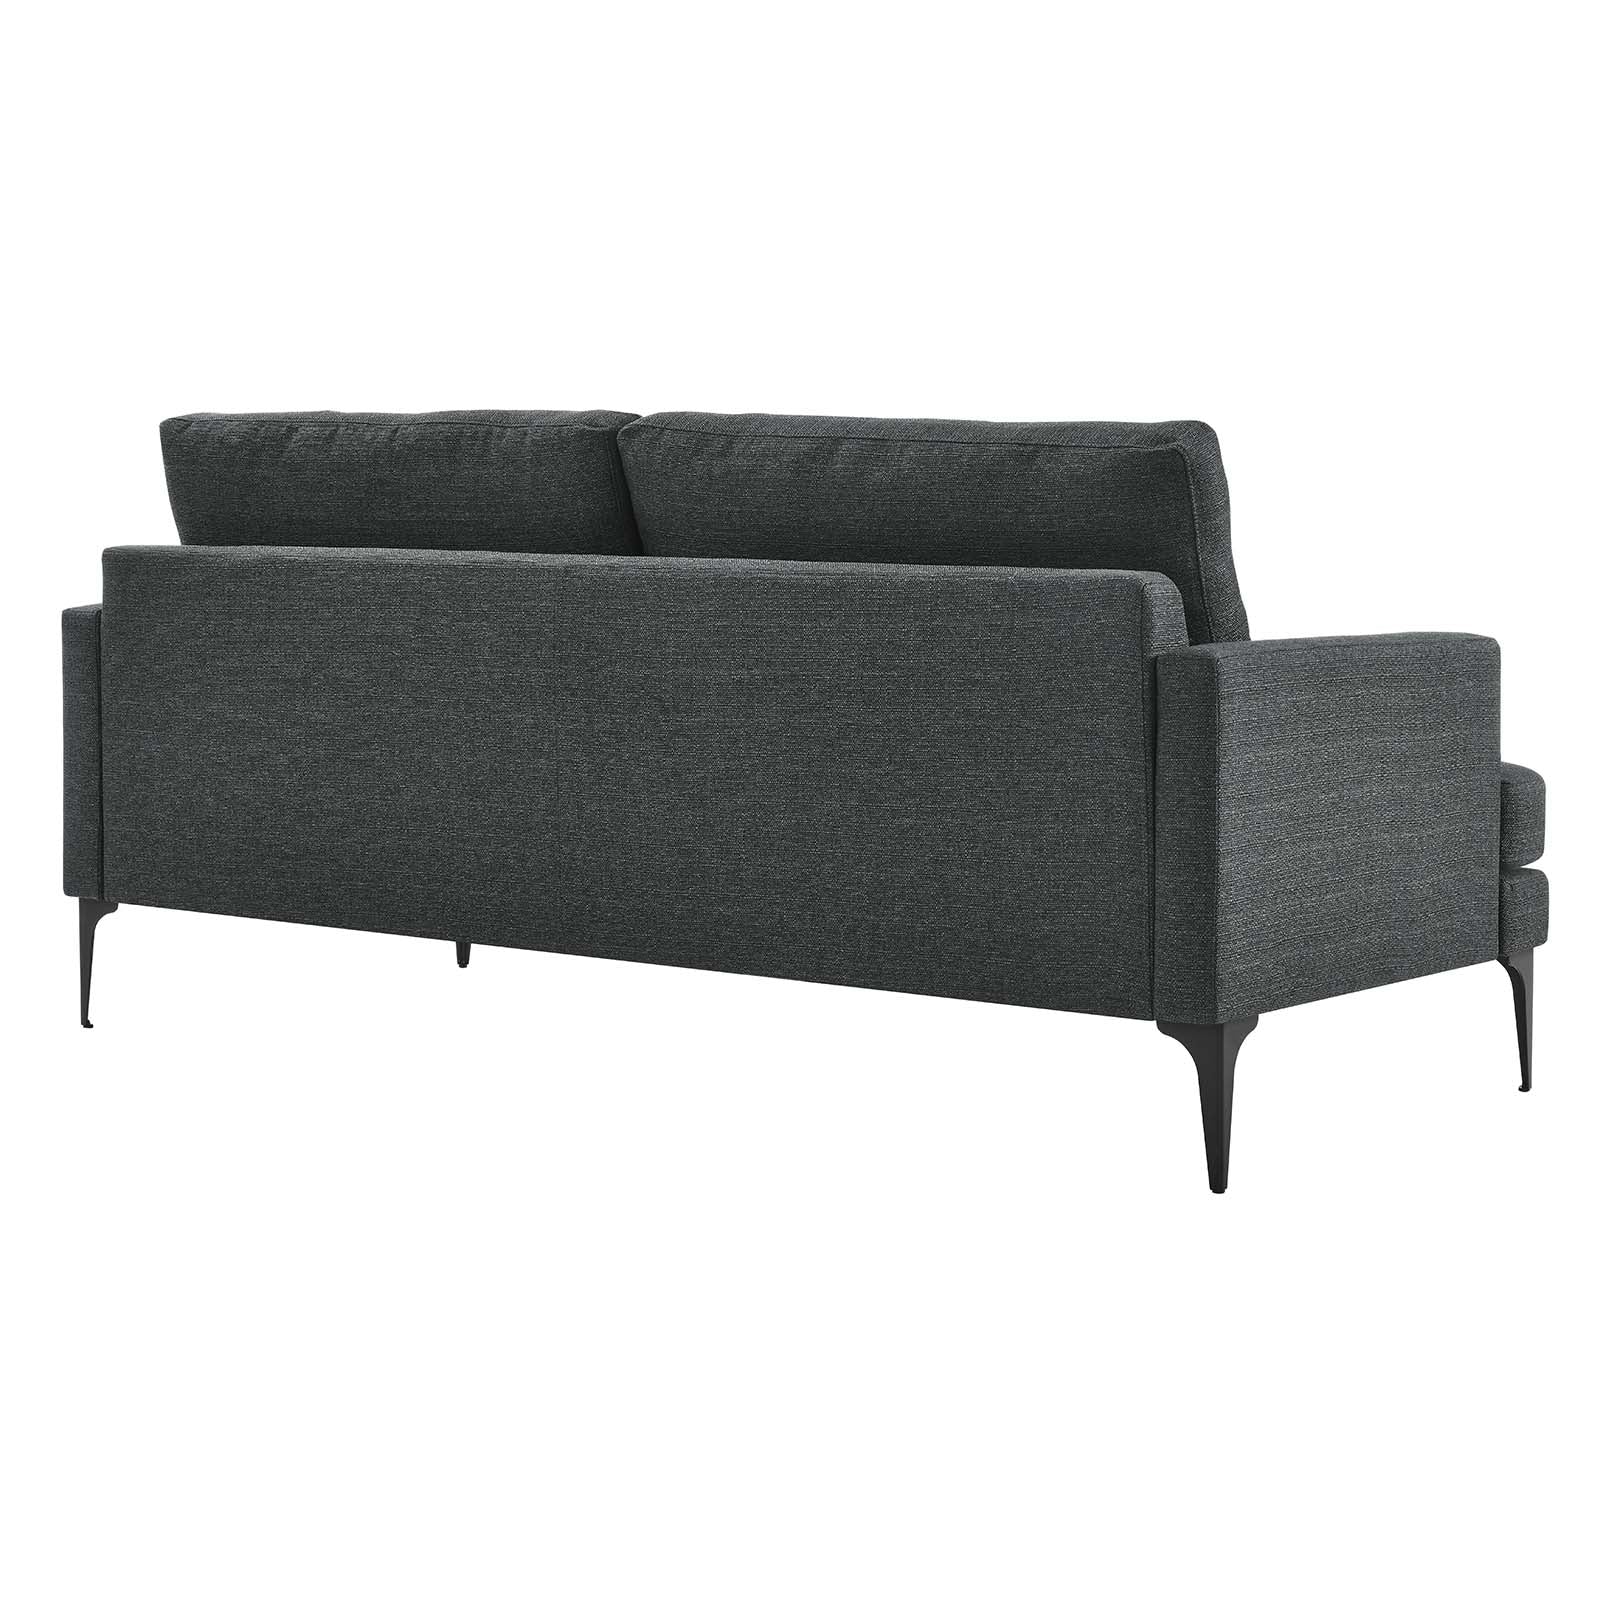 Evermore Upholstered Fabric Sofa - East Shore Modern Home Furnishings